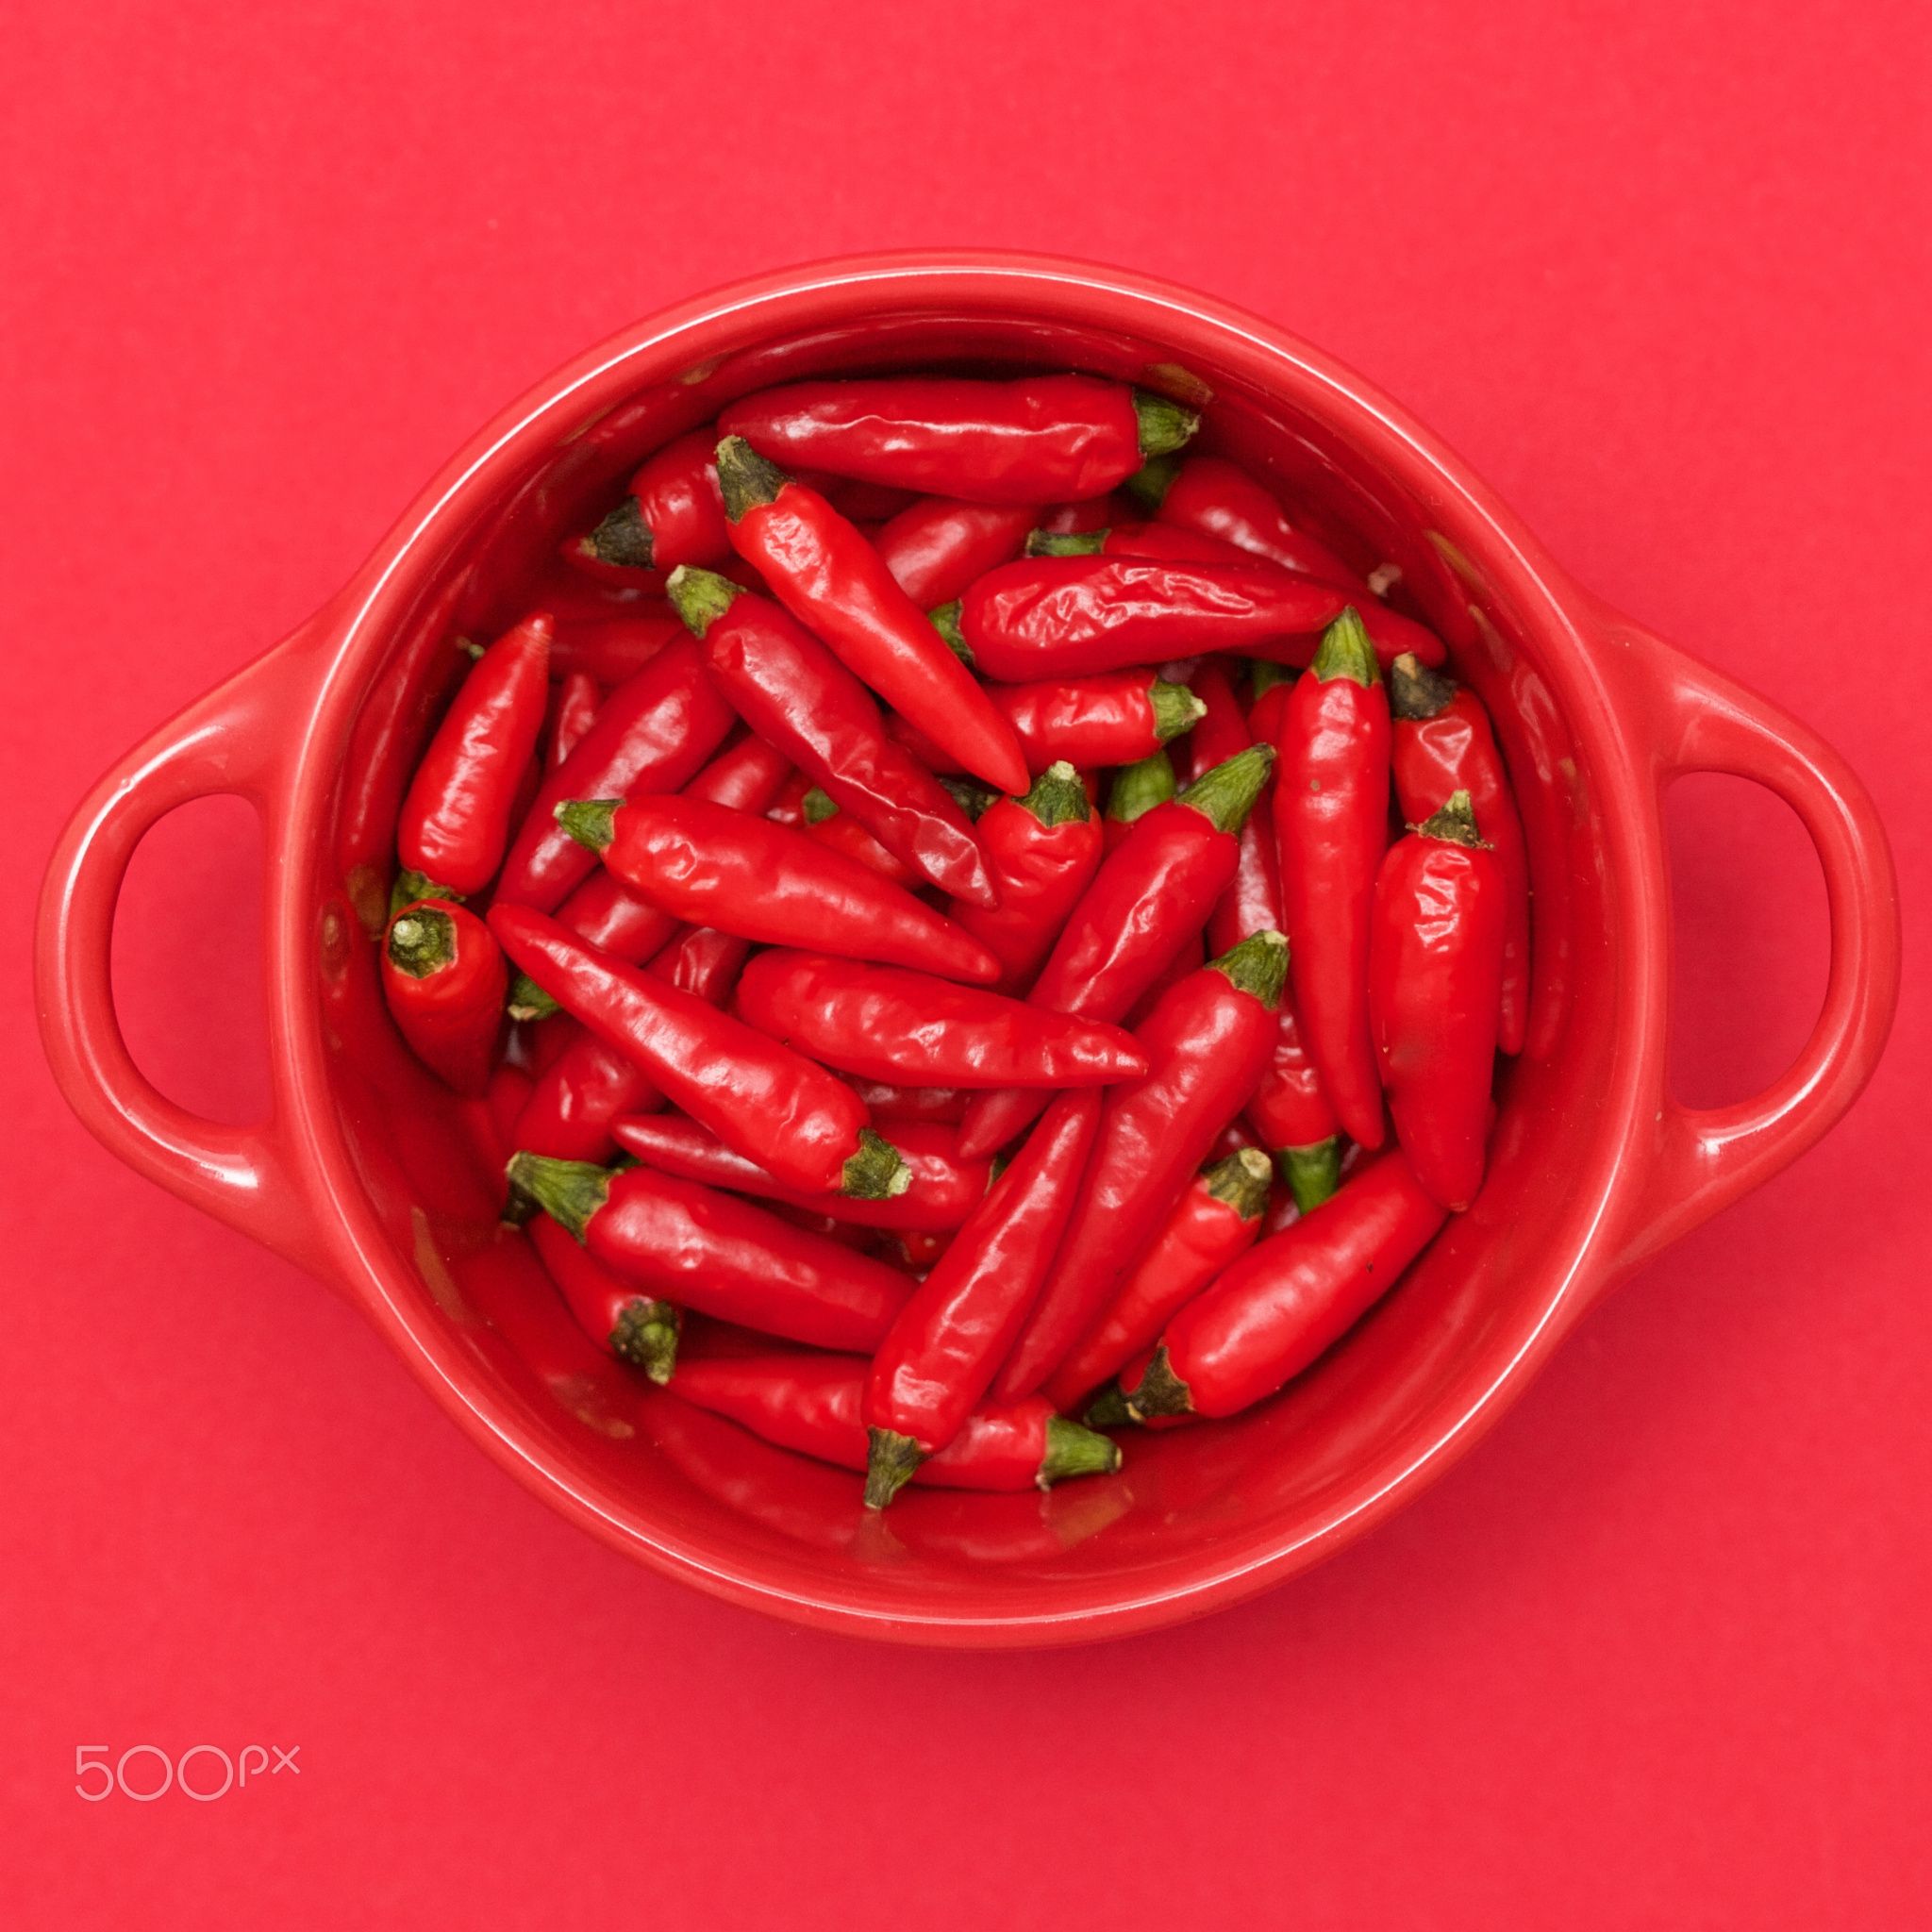 Red cubed 6 - Red peppers in a red bowl on a red background. | FOOD ...